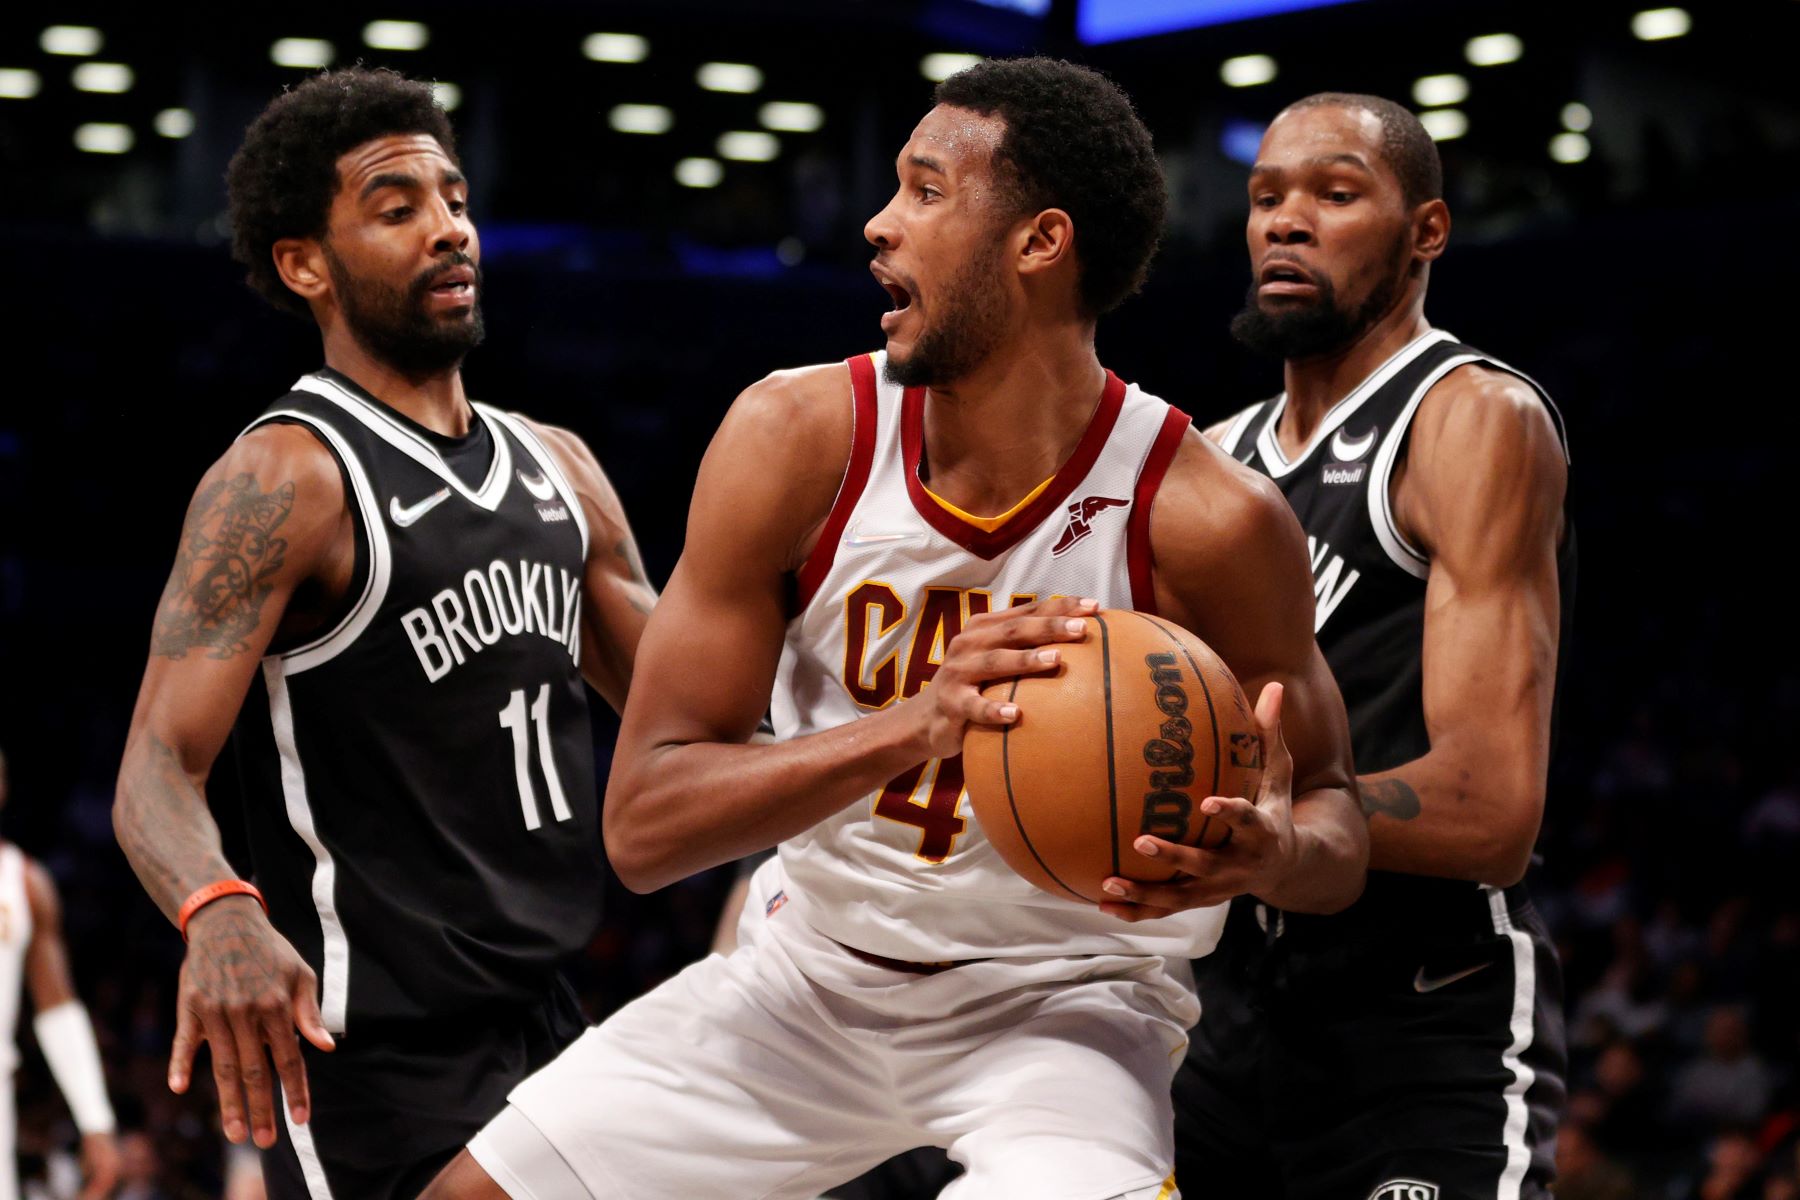 Evan Mobley #4 of the Cleveland Cavaliers playing against the Brooklyn Nets